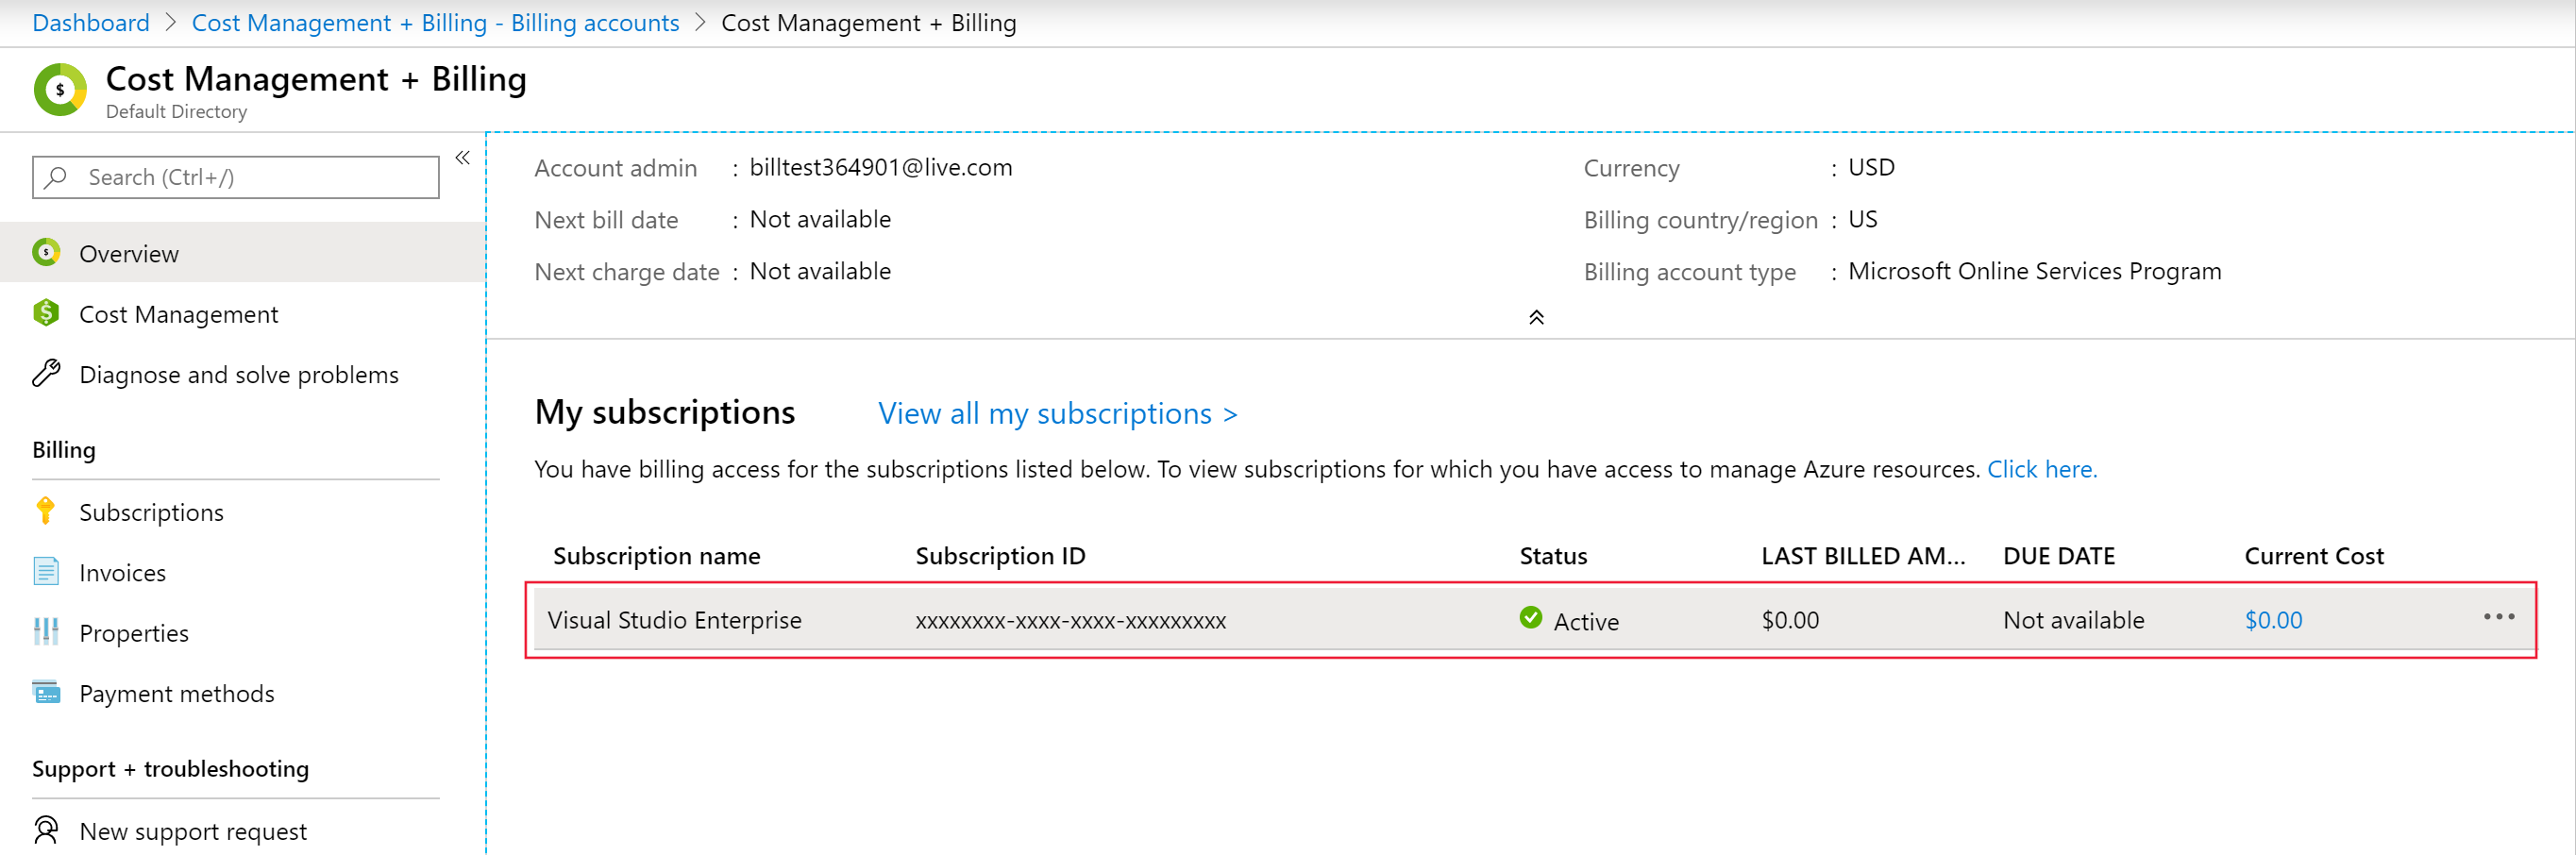 Screenshot shows the My subscriptions area where you can select your Visual Studio Enterprise subscription.